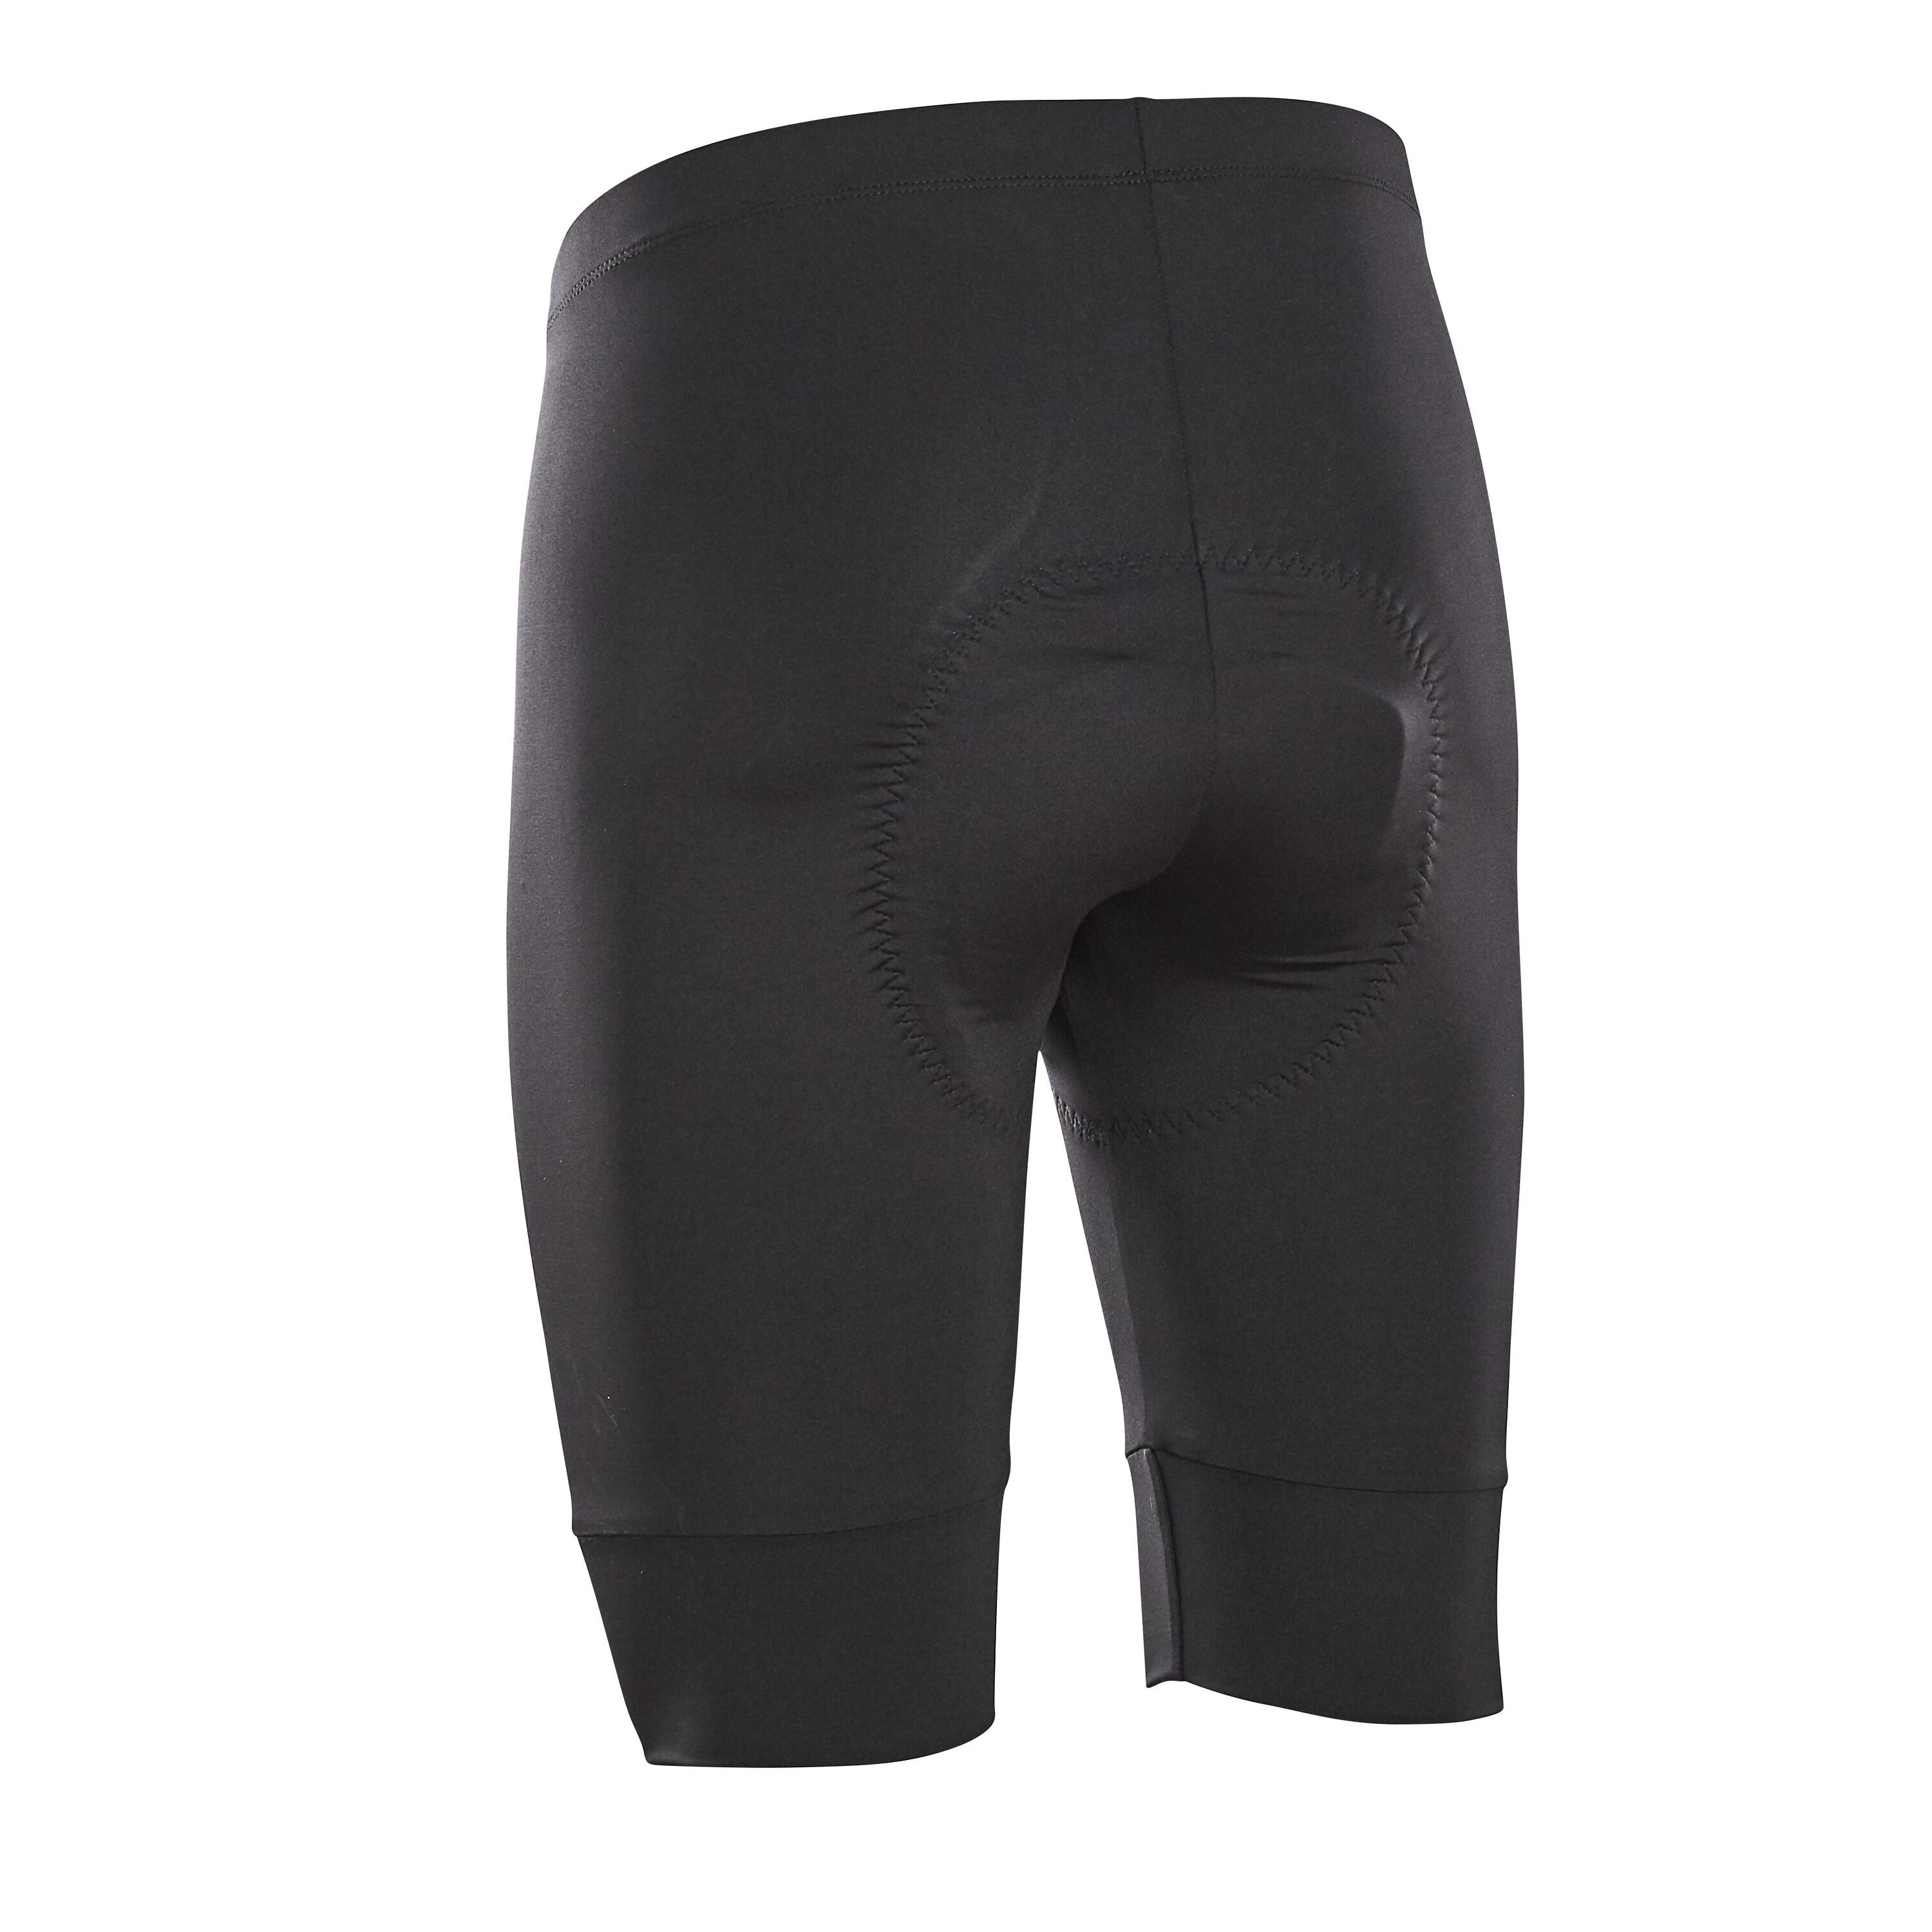 Essential Men's Road Cycling Bibless Shorts 2/8